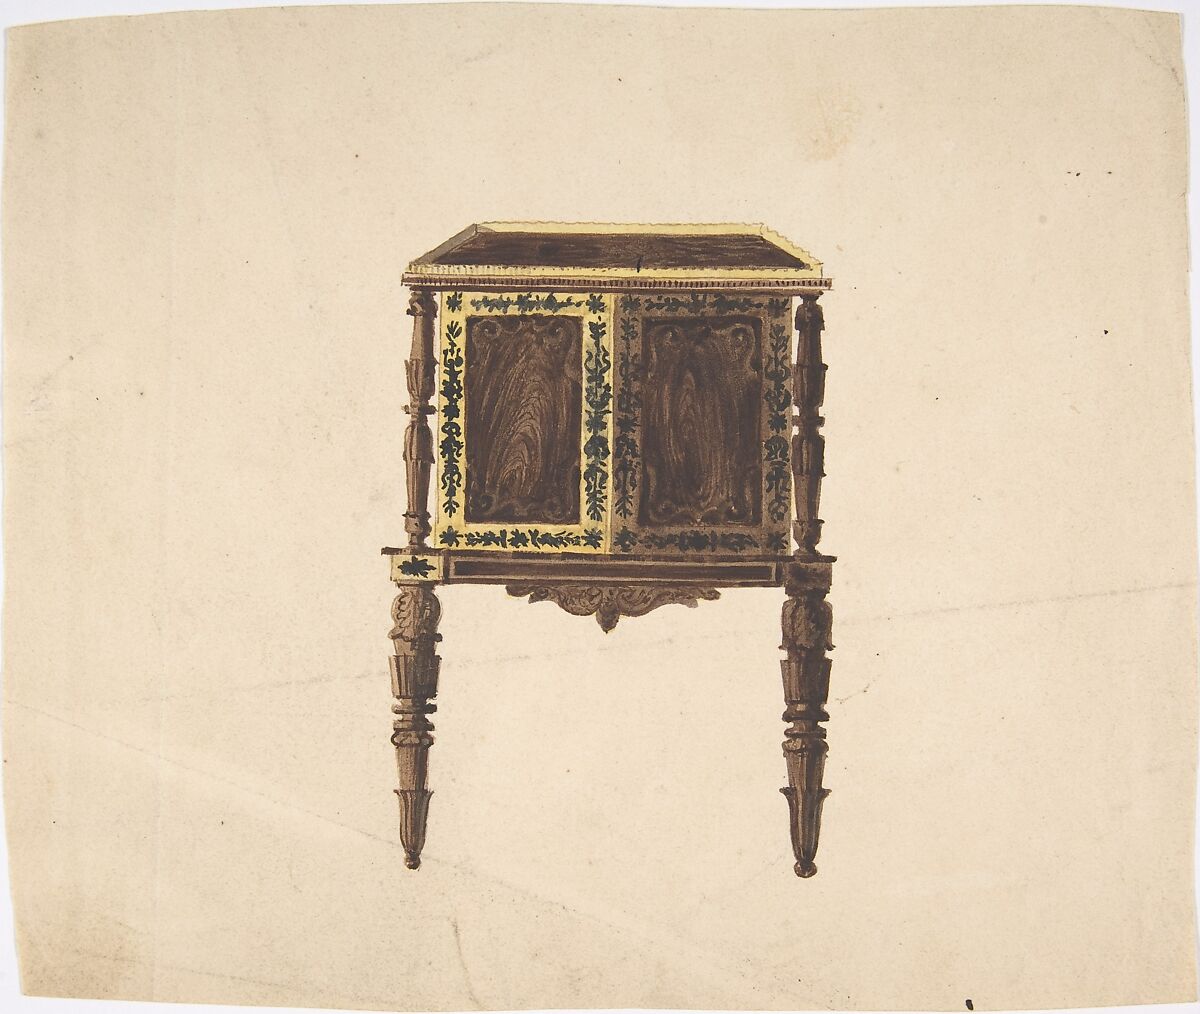 Design for a Small Cabinet with Elaborately Carved Legs, Anonymous, British, 19th century, Pen and ink, watercolor 